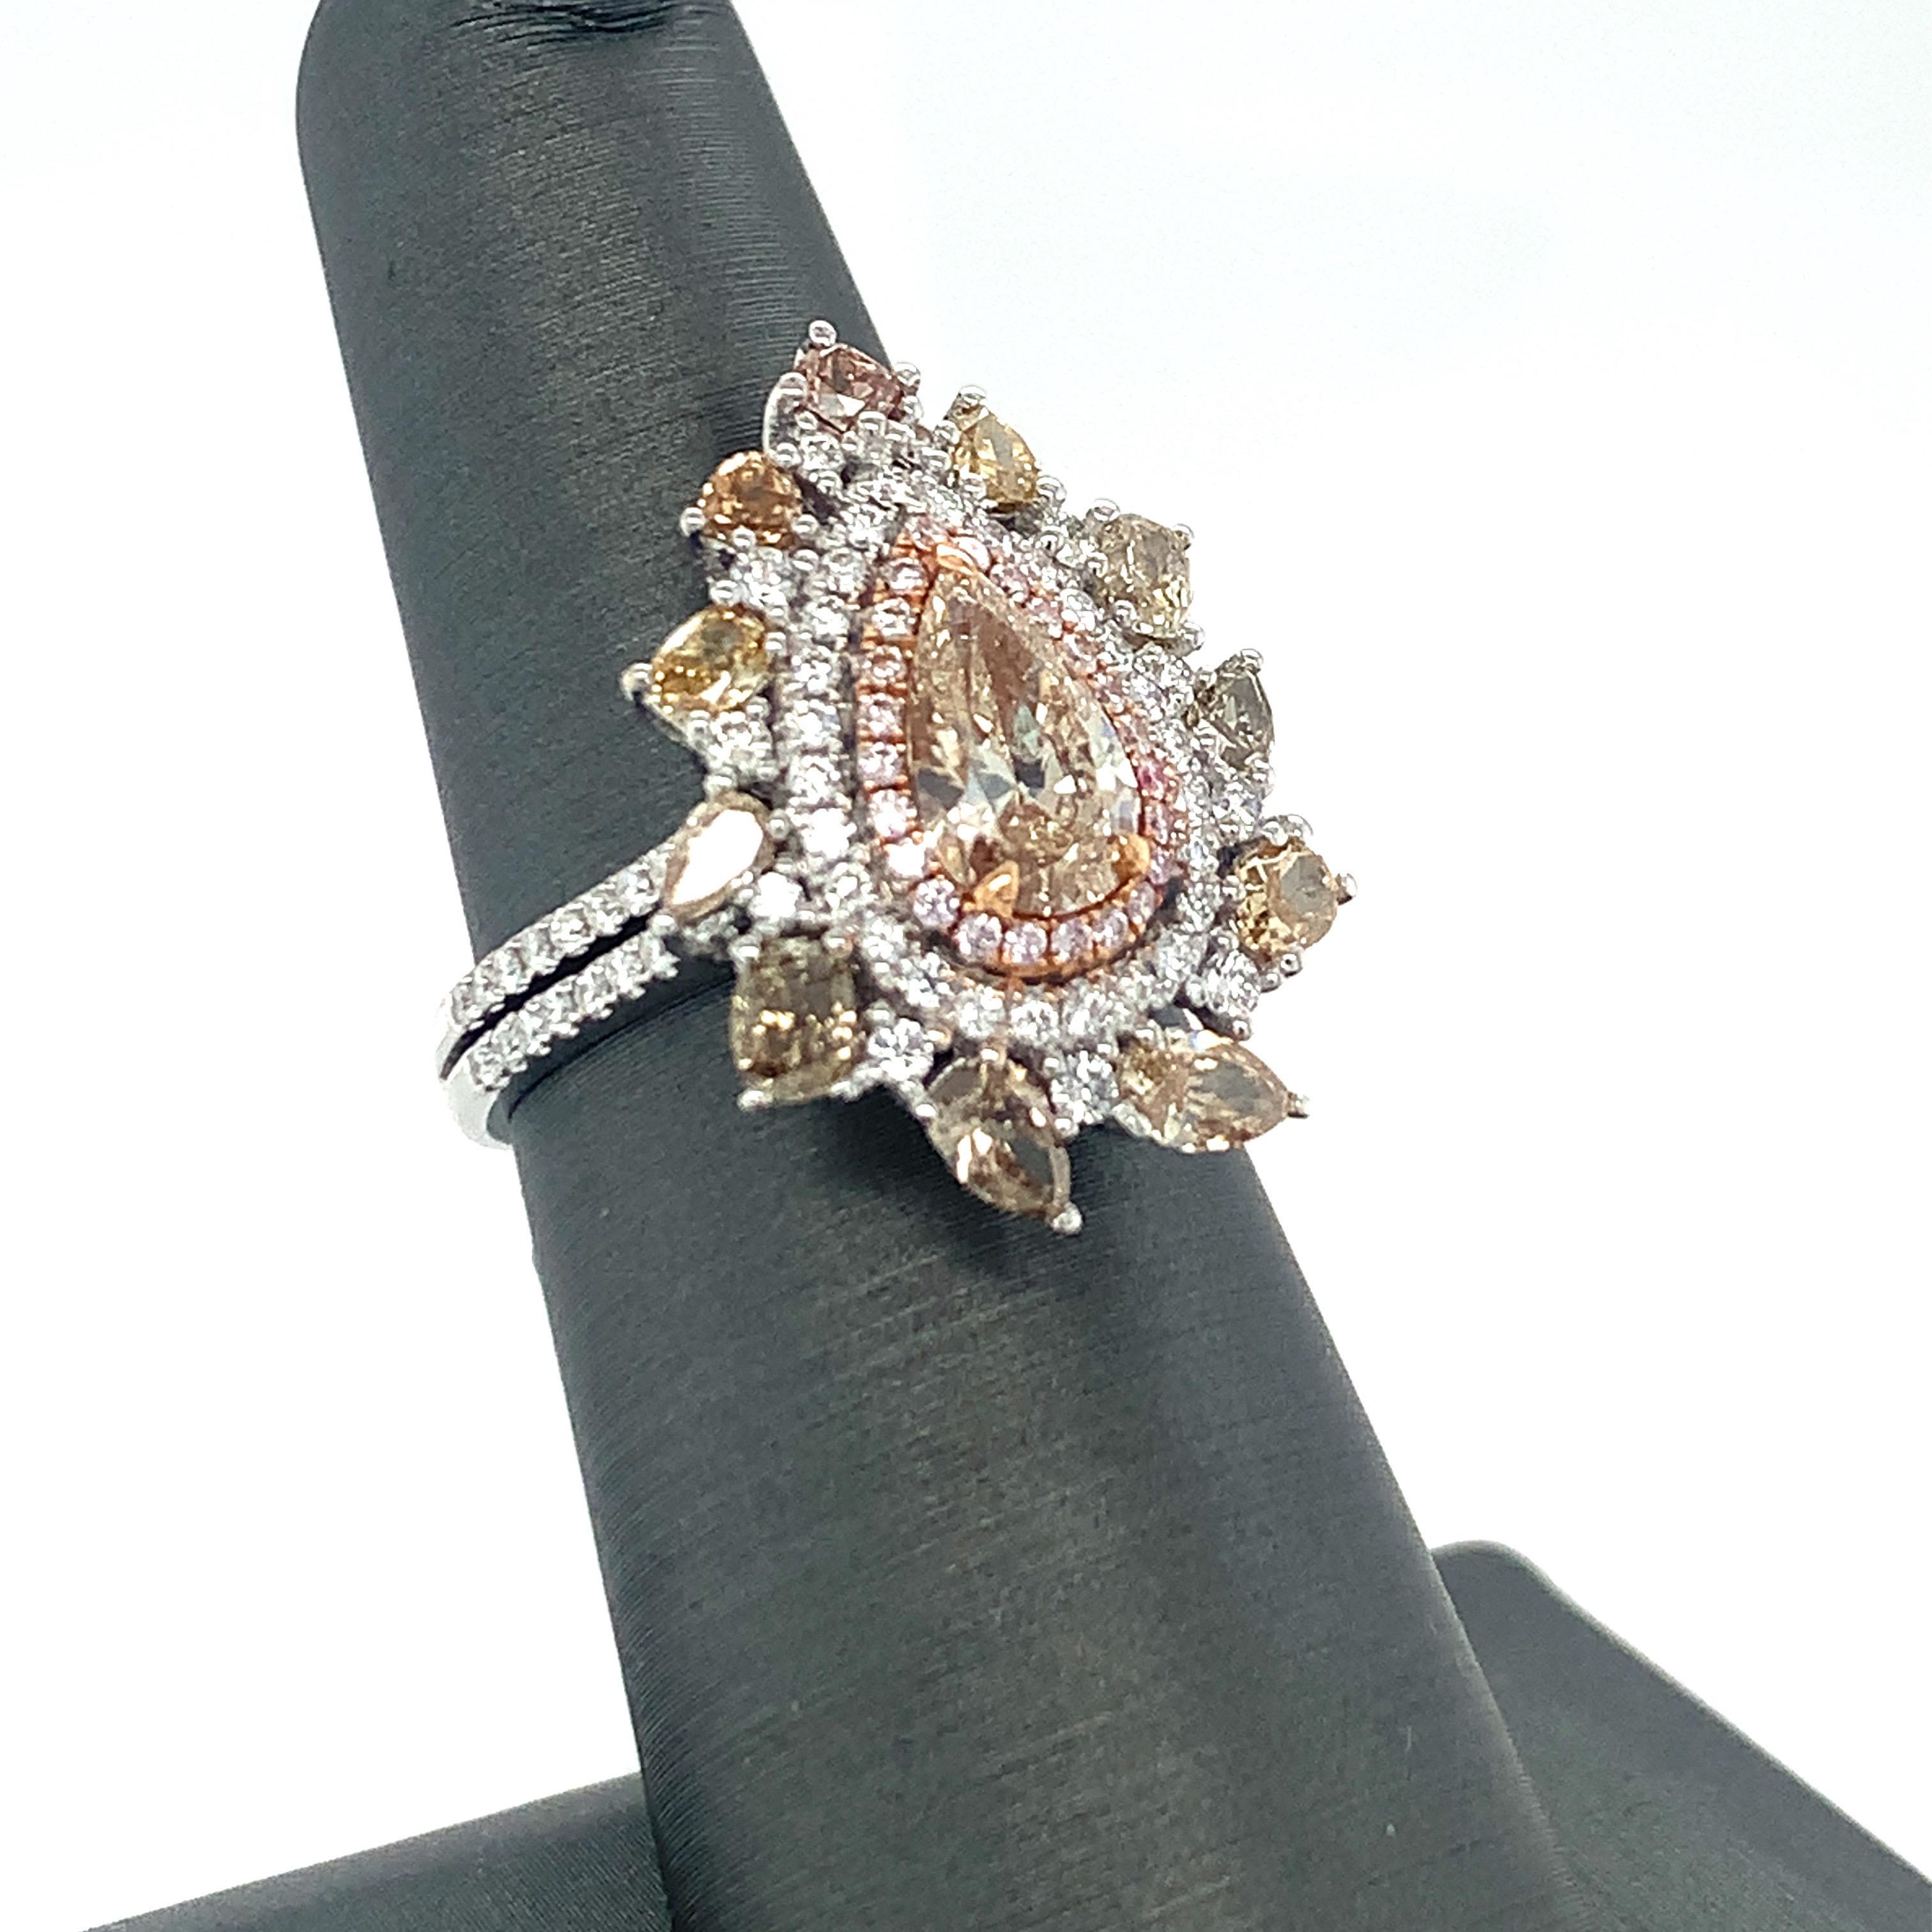 This Pear shaped champagne center diamond is surrounded by three layer halo of diamonds with half double line pave setting band. Innermost layer has pink, middle layer has white and outer layer has multi shaped & multi color diamonds. The unique